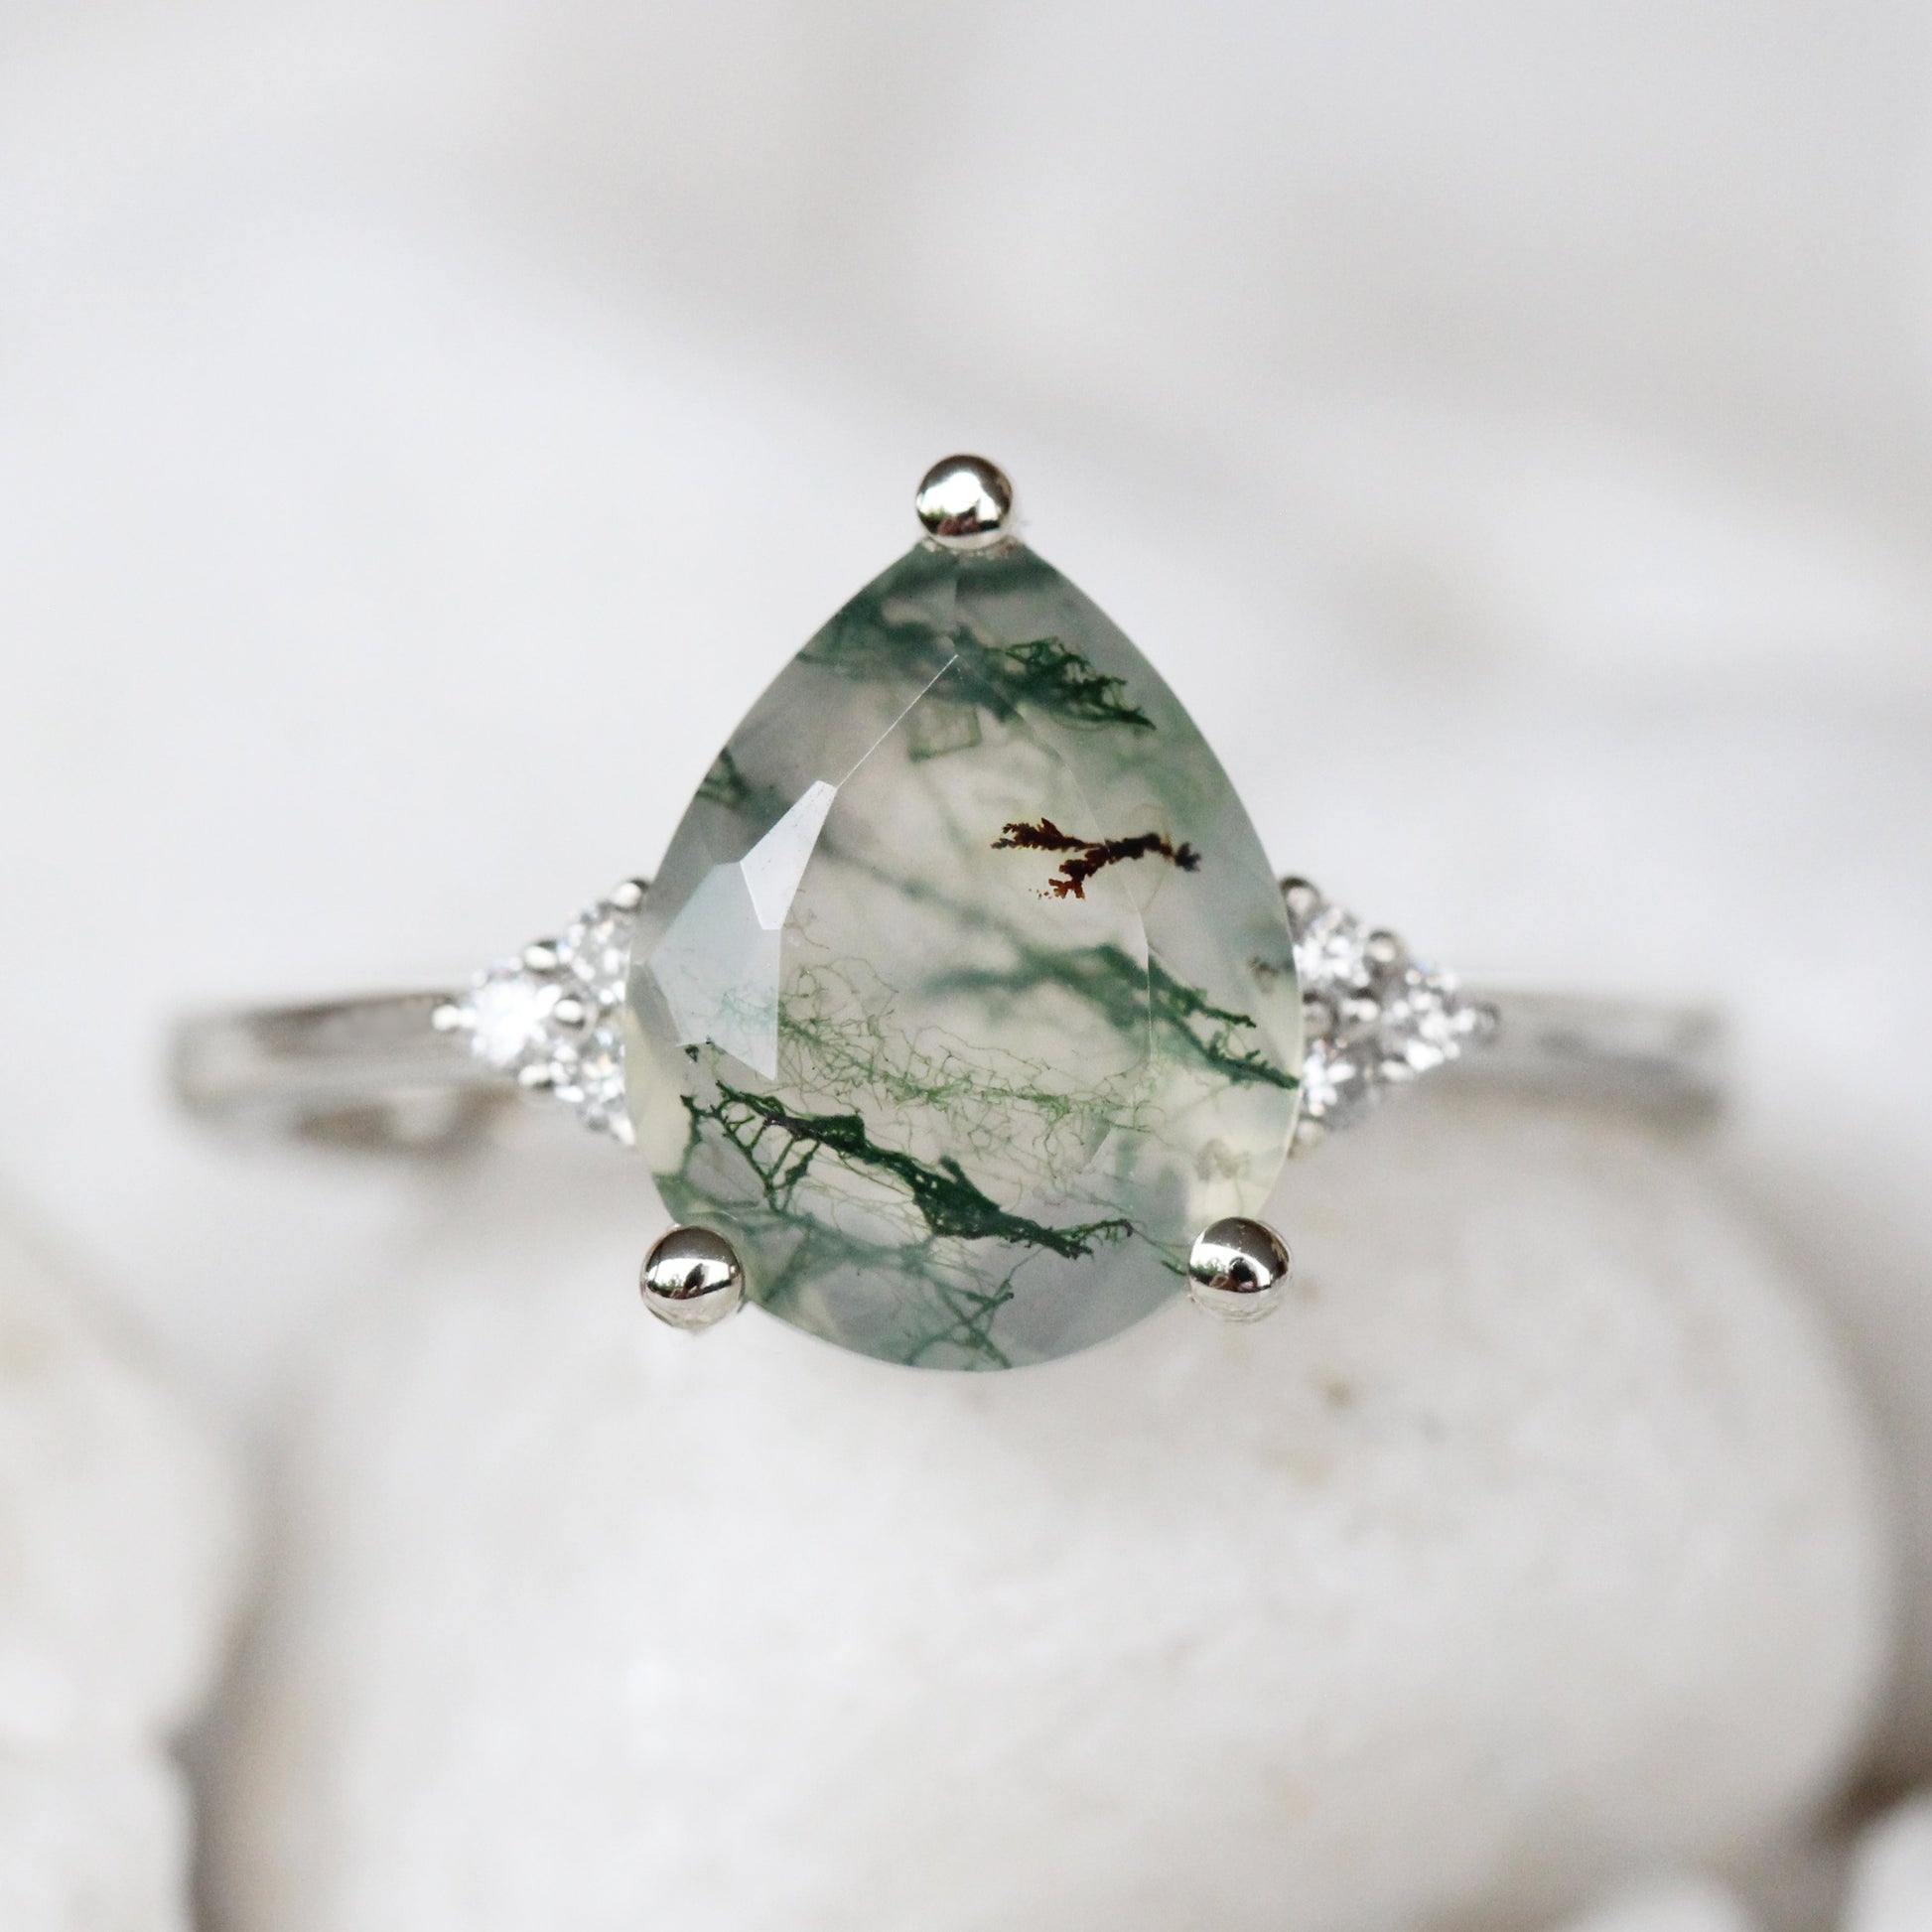 Imogene Ring with a Pear Moss Agate and White Accent Diamonds - Made to Order - Each Stone is Unique - Midwinter Co. Alternative Bridal Rings and Modern Fine Jewelry